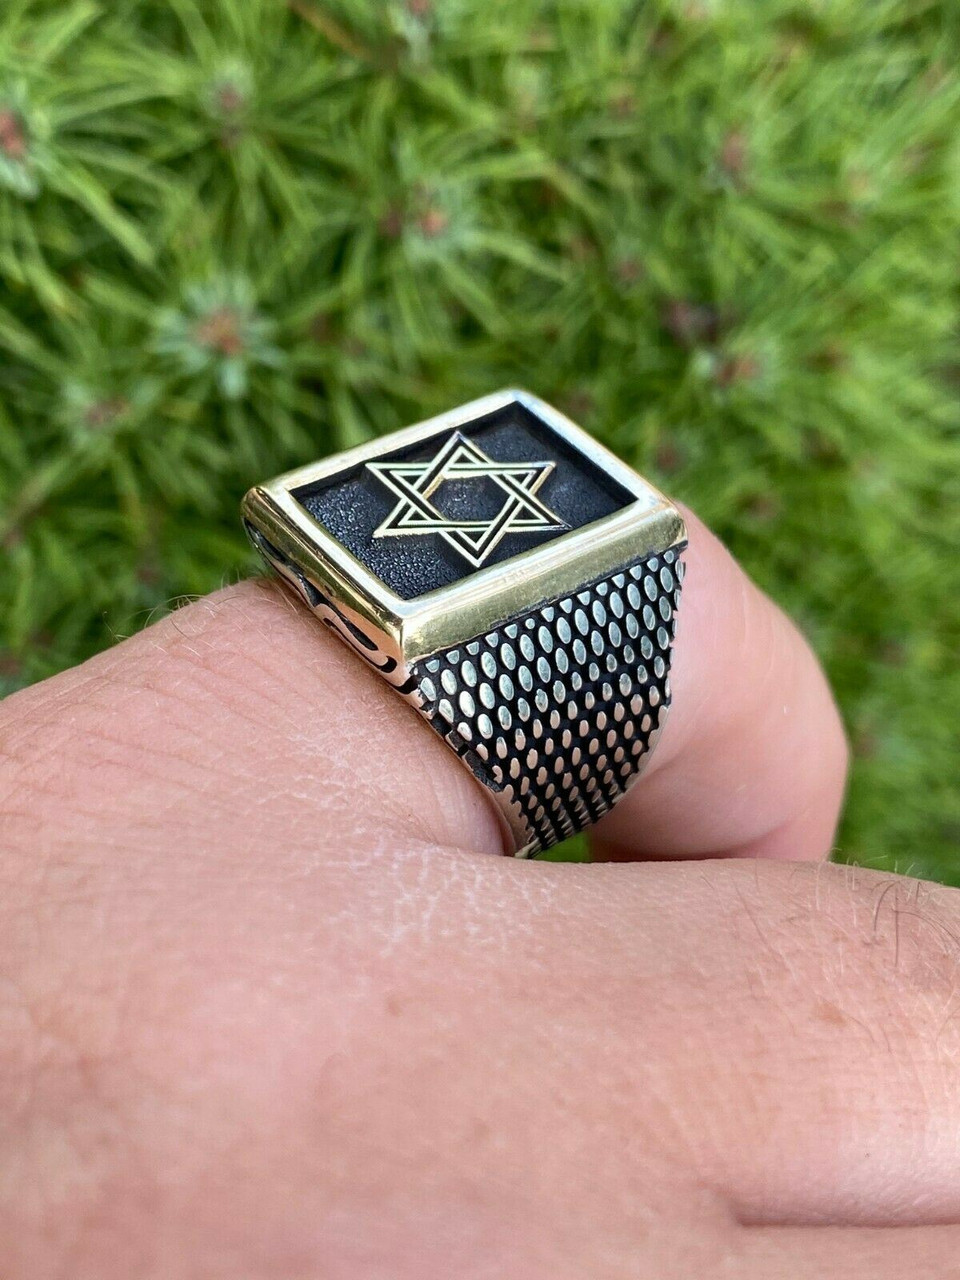 italiano silver inc mens 14k gold and real solid 925 sterling silver jewish star of magen david ring 76985.1664395572